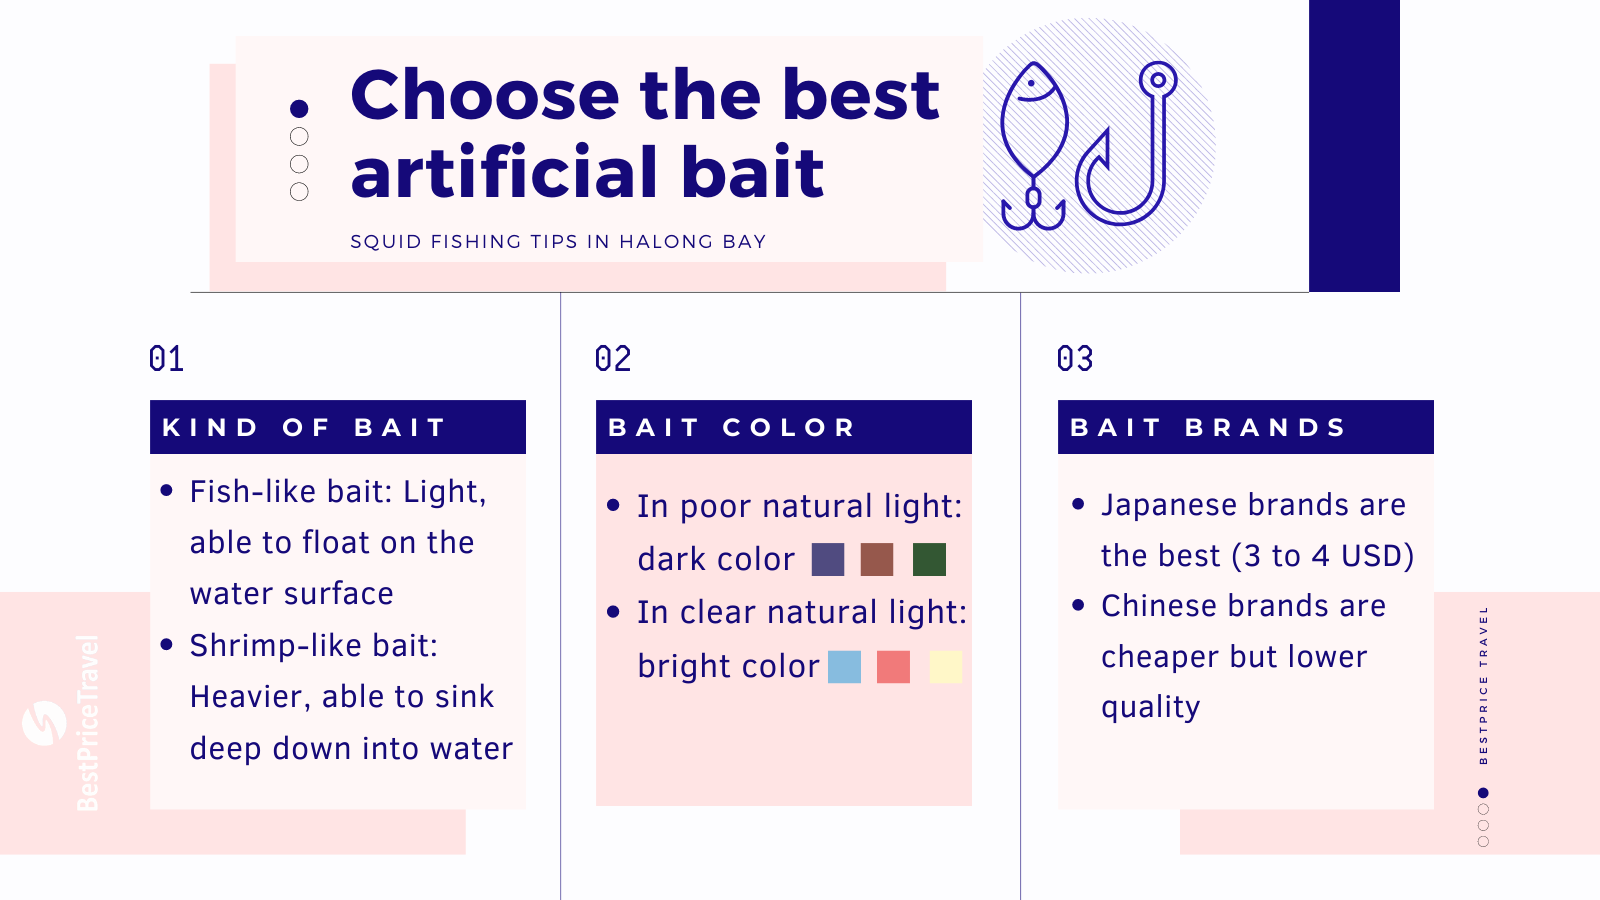 Tips for choosing the best artficial bait for halong bay squid fishing 